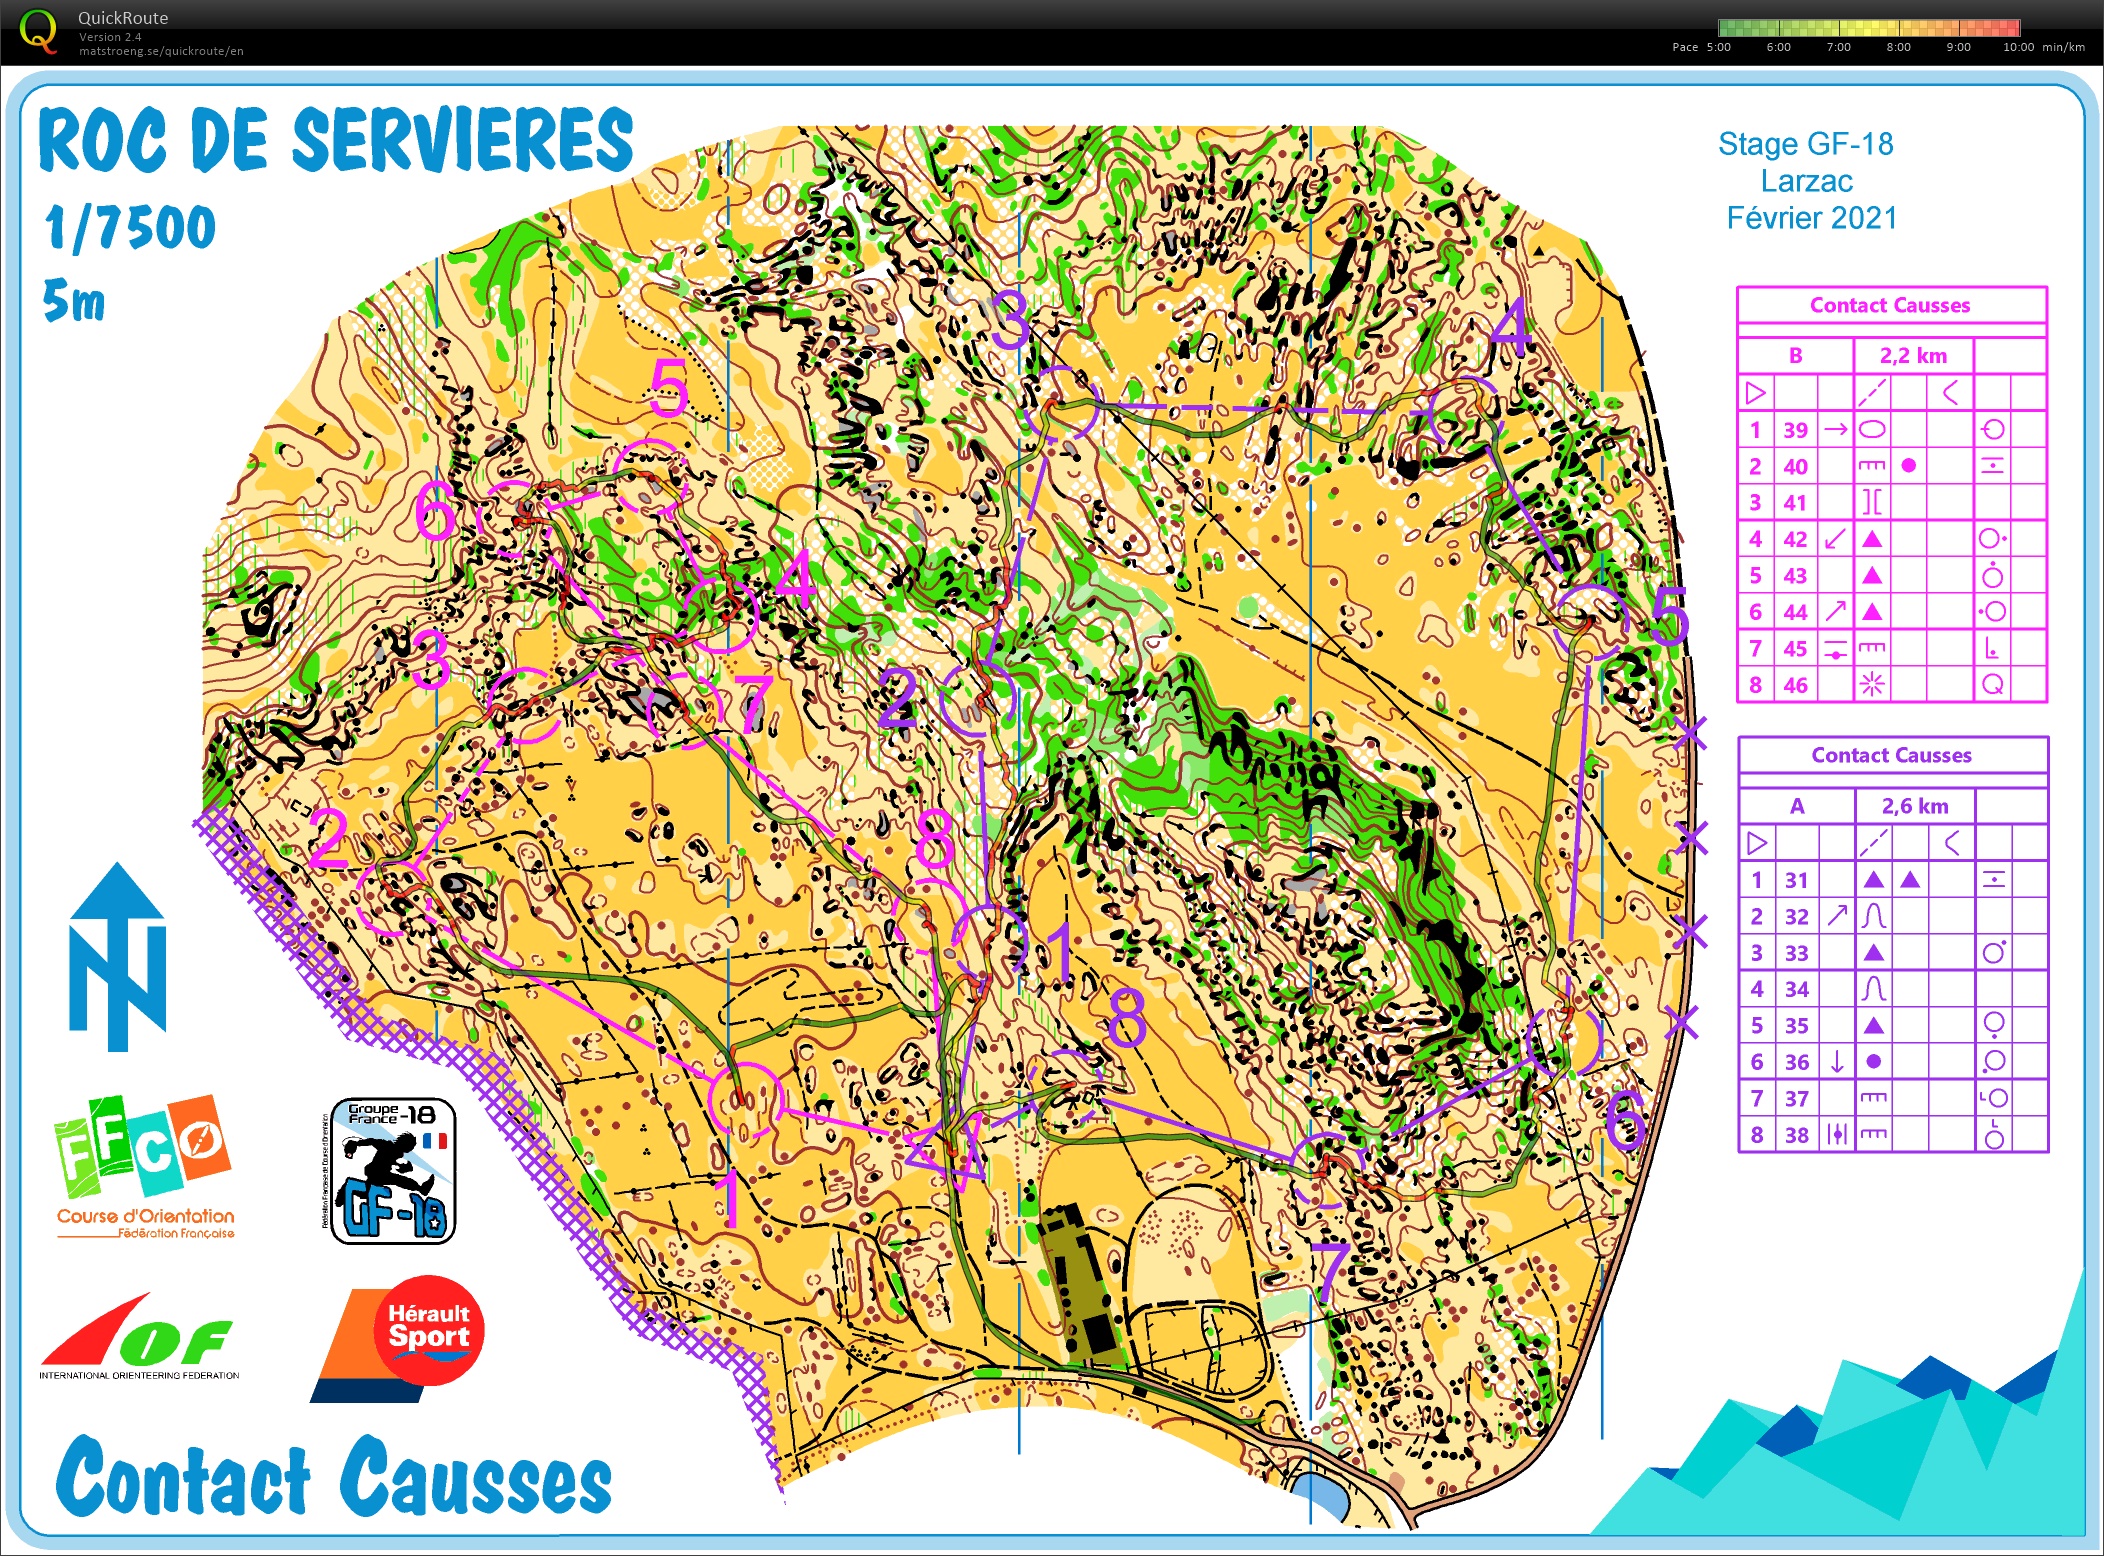 Stage GF-18 Larzac (E2) contact "Causse" (06.02.2021)